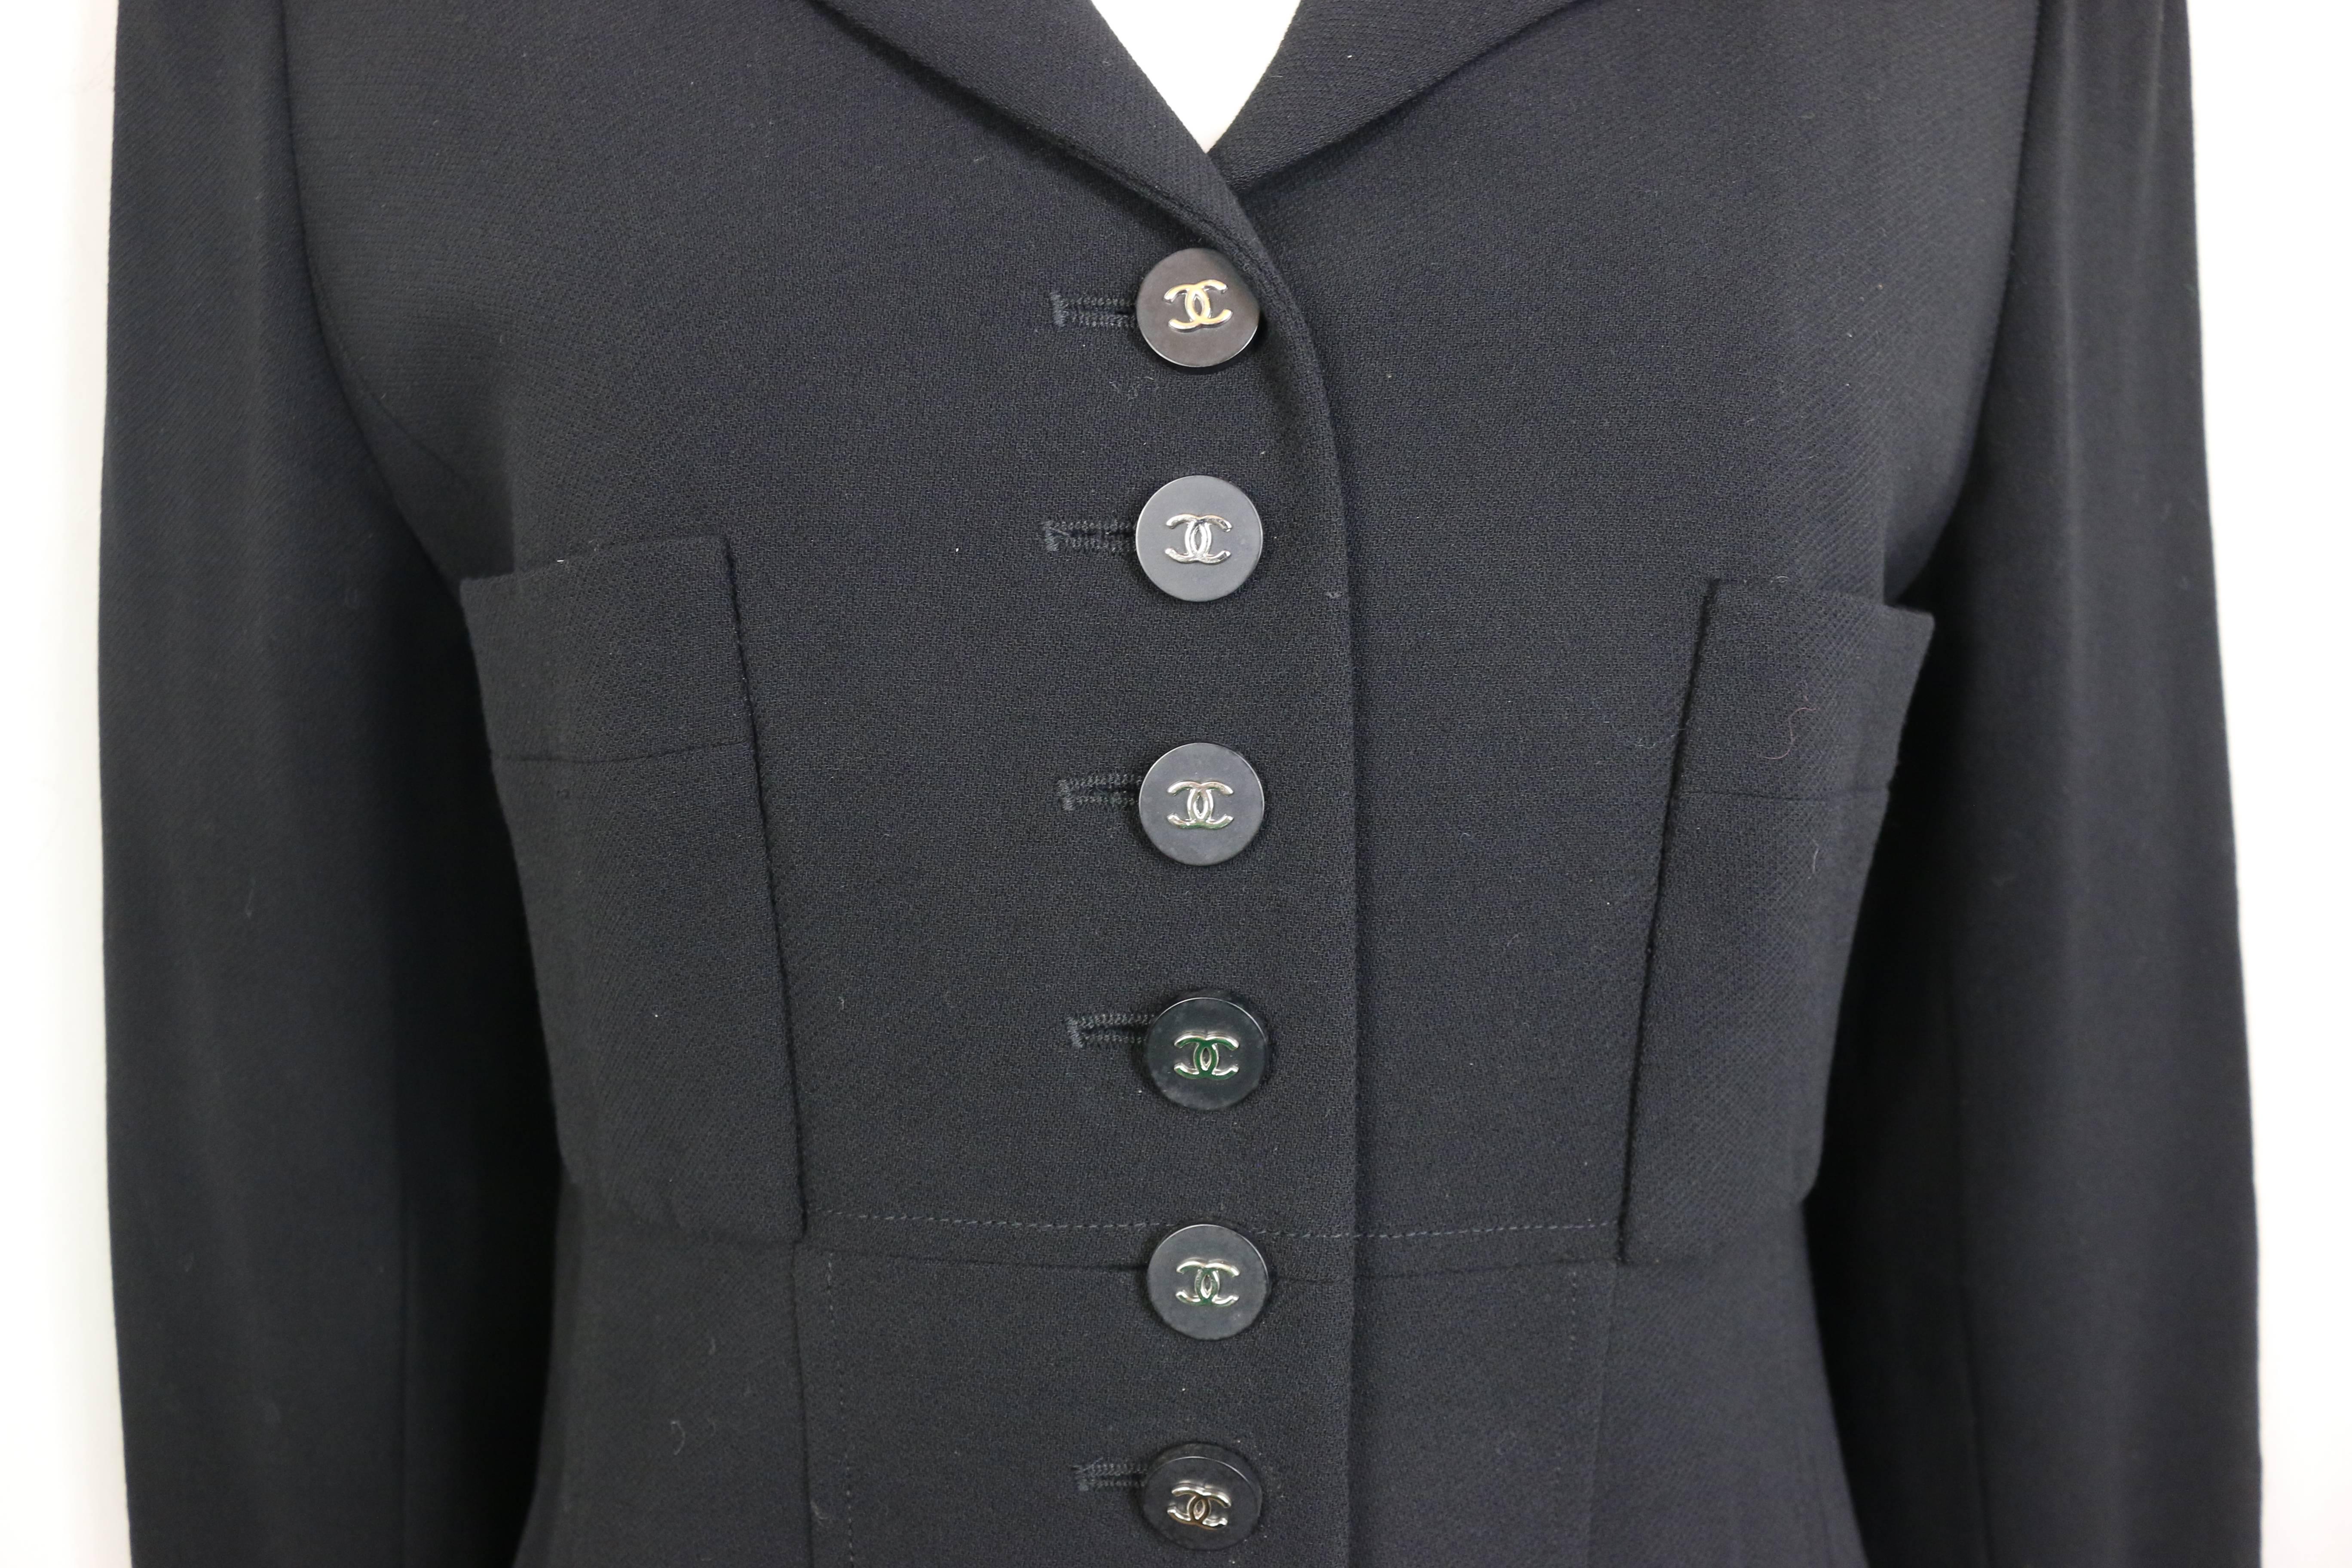 - Vintage Chanel classic black wool jacket from 1996 pre-collection. 

- Featuring silver 